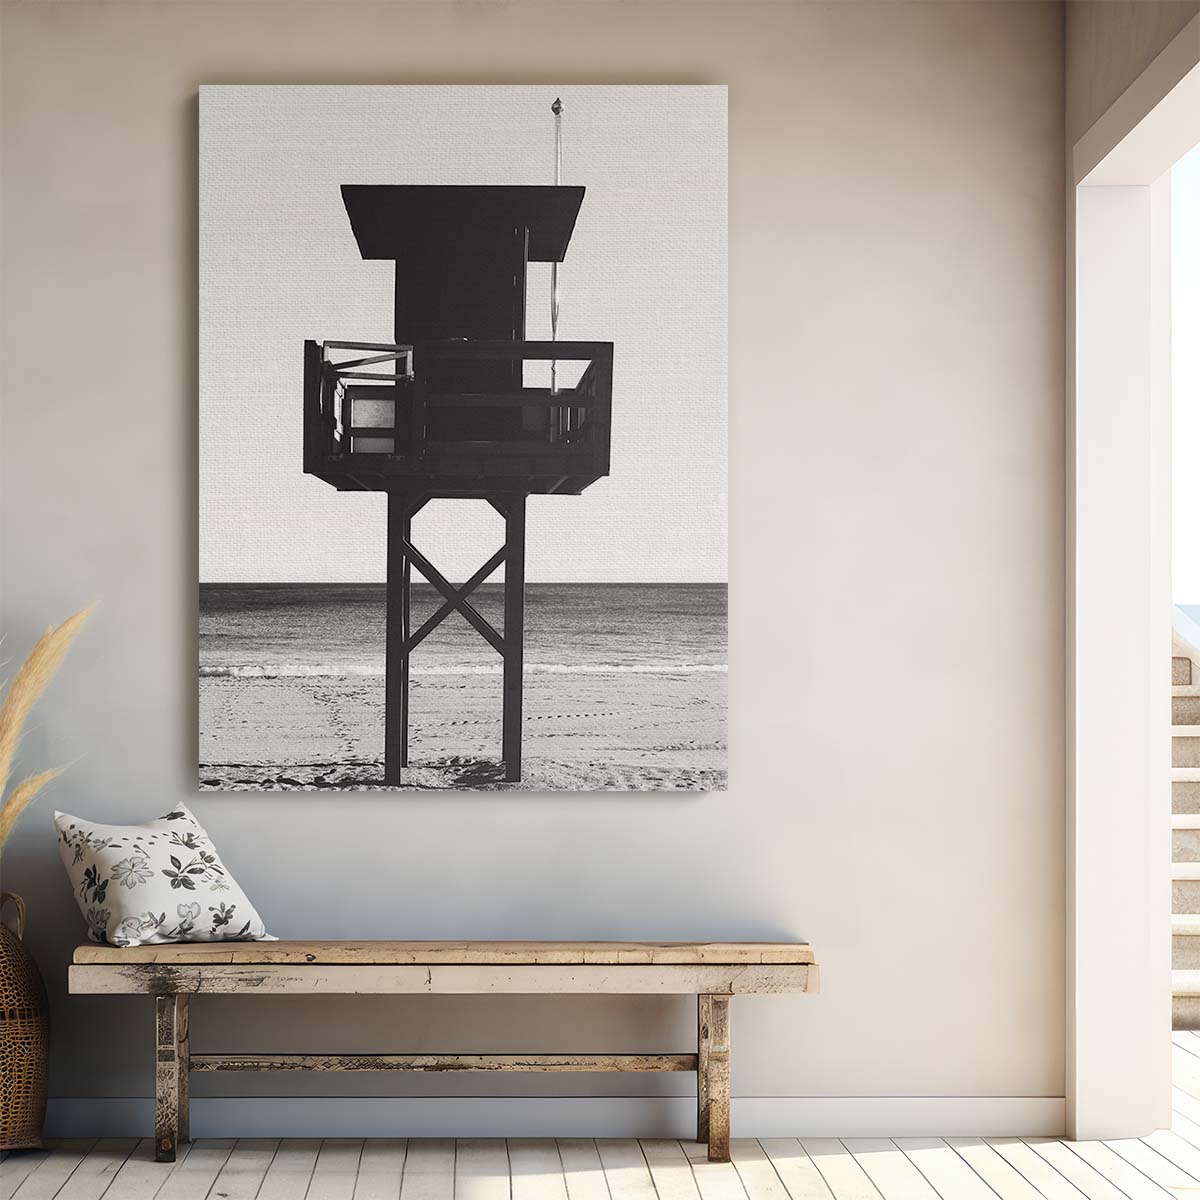 Black and White Beach Lifeguard Tower Seascape Photography Art by Luxuriance Designs, made in USA